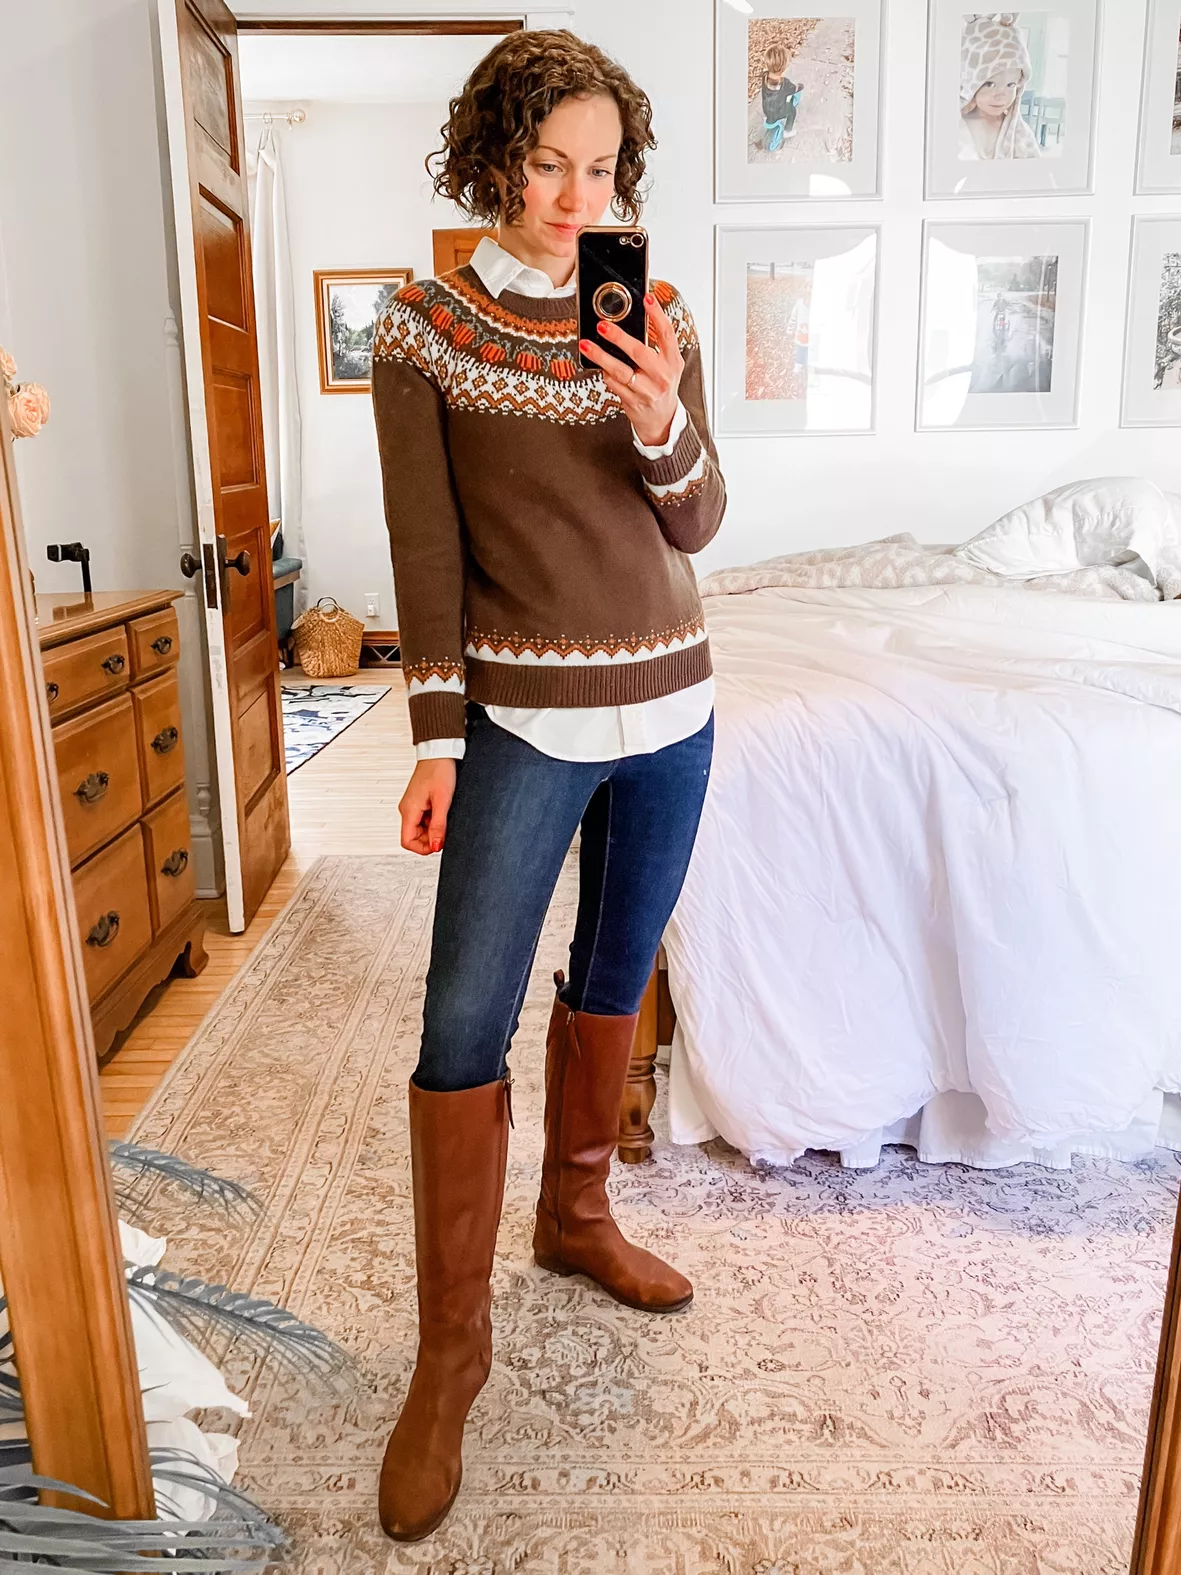 womens riding boots outfit